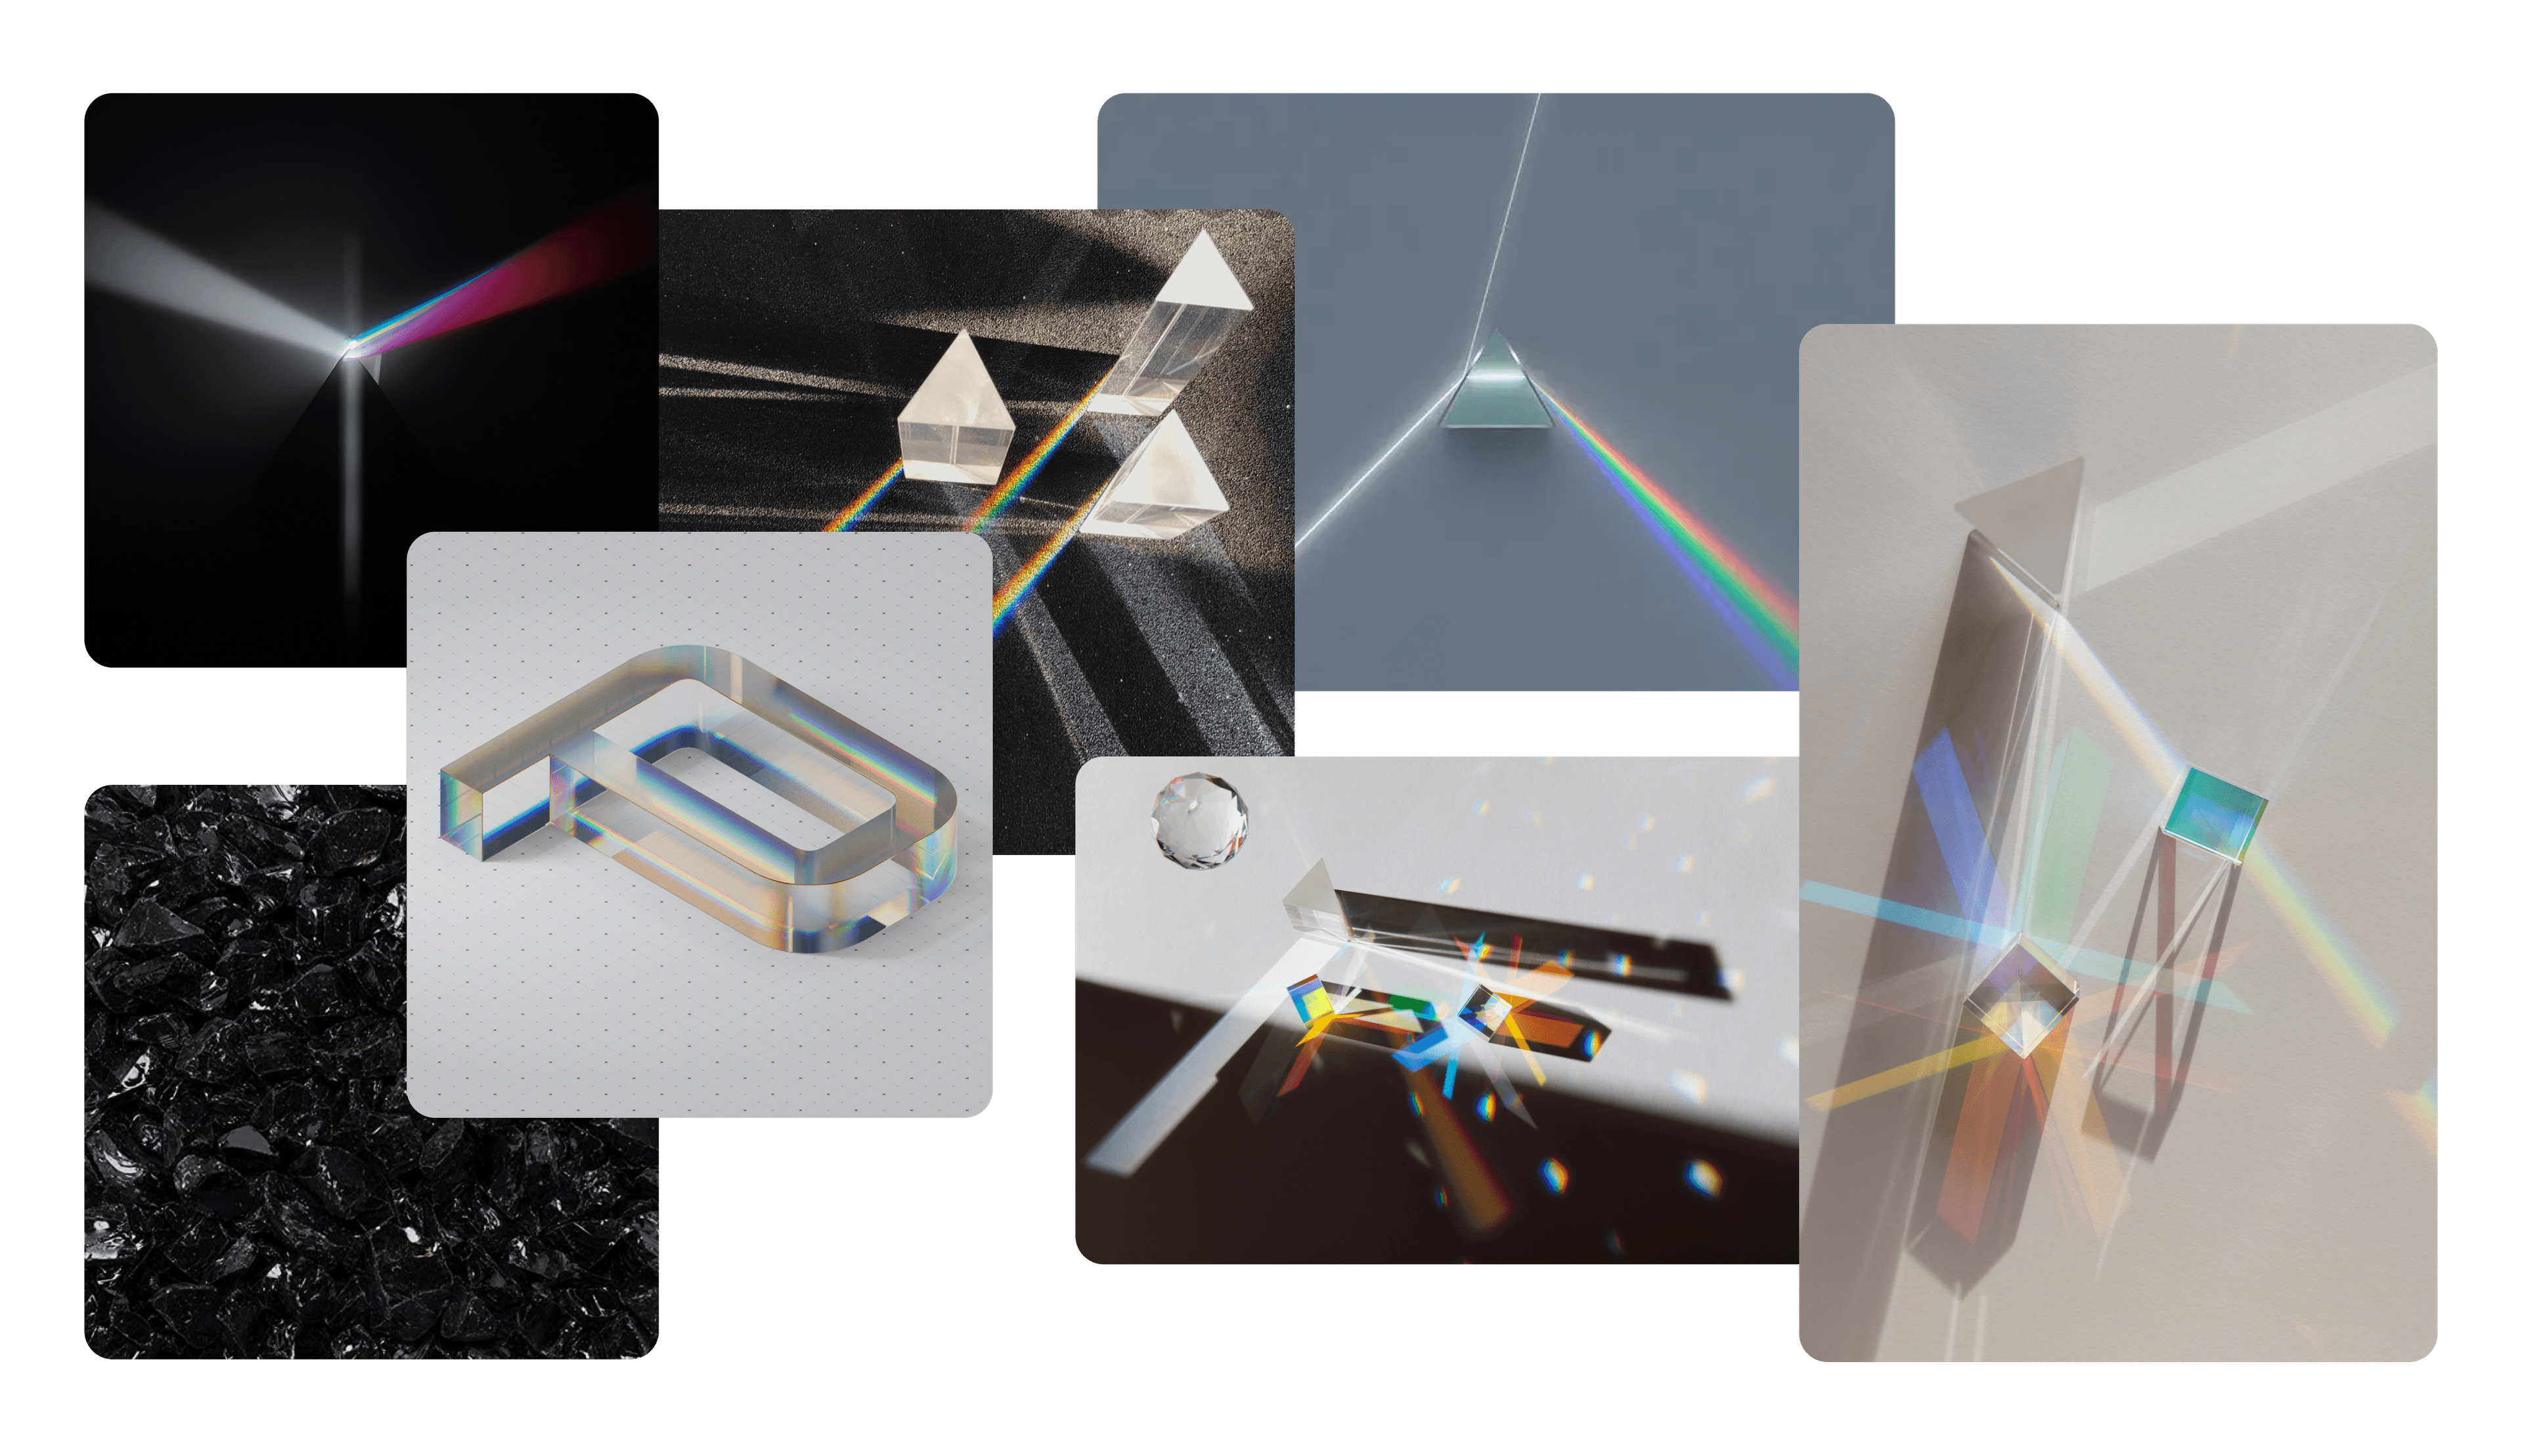 A mood board depicting many of the concepts that led to the creation of the Next.js Conf registration page. Prisms, beams of light, and rainbows create vivid, eye-catching visual elements.¹